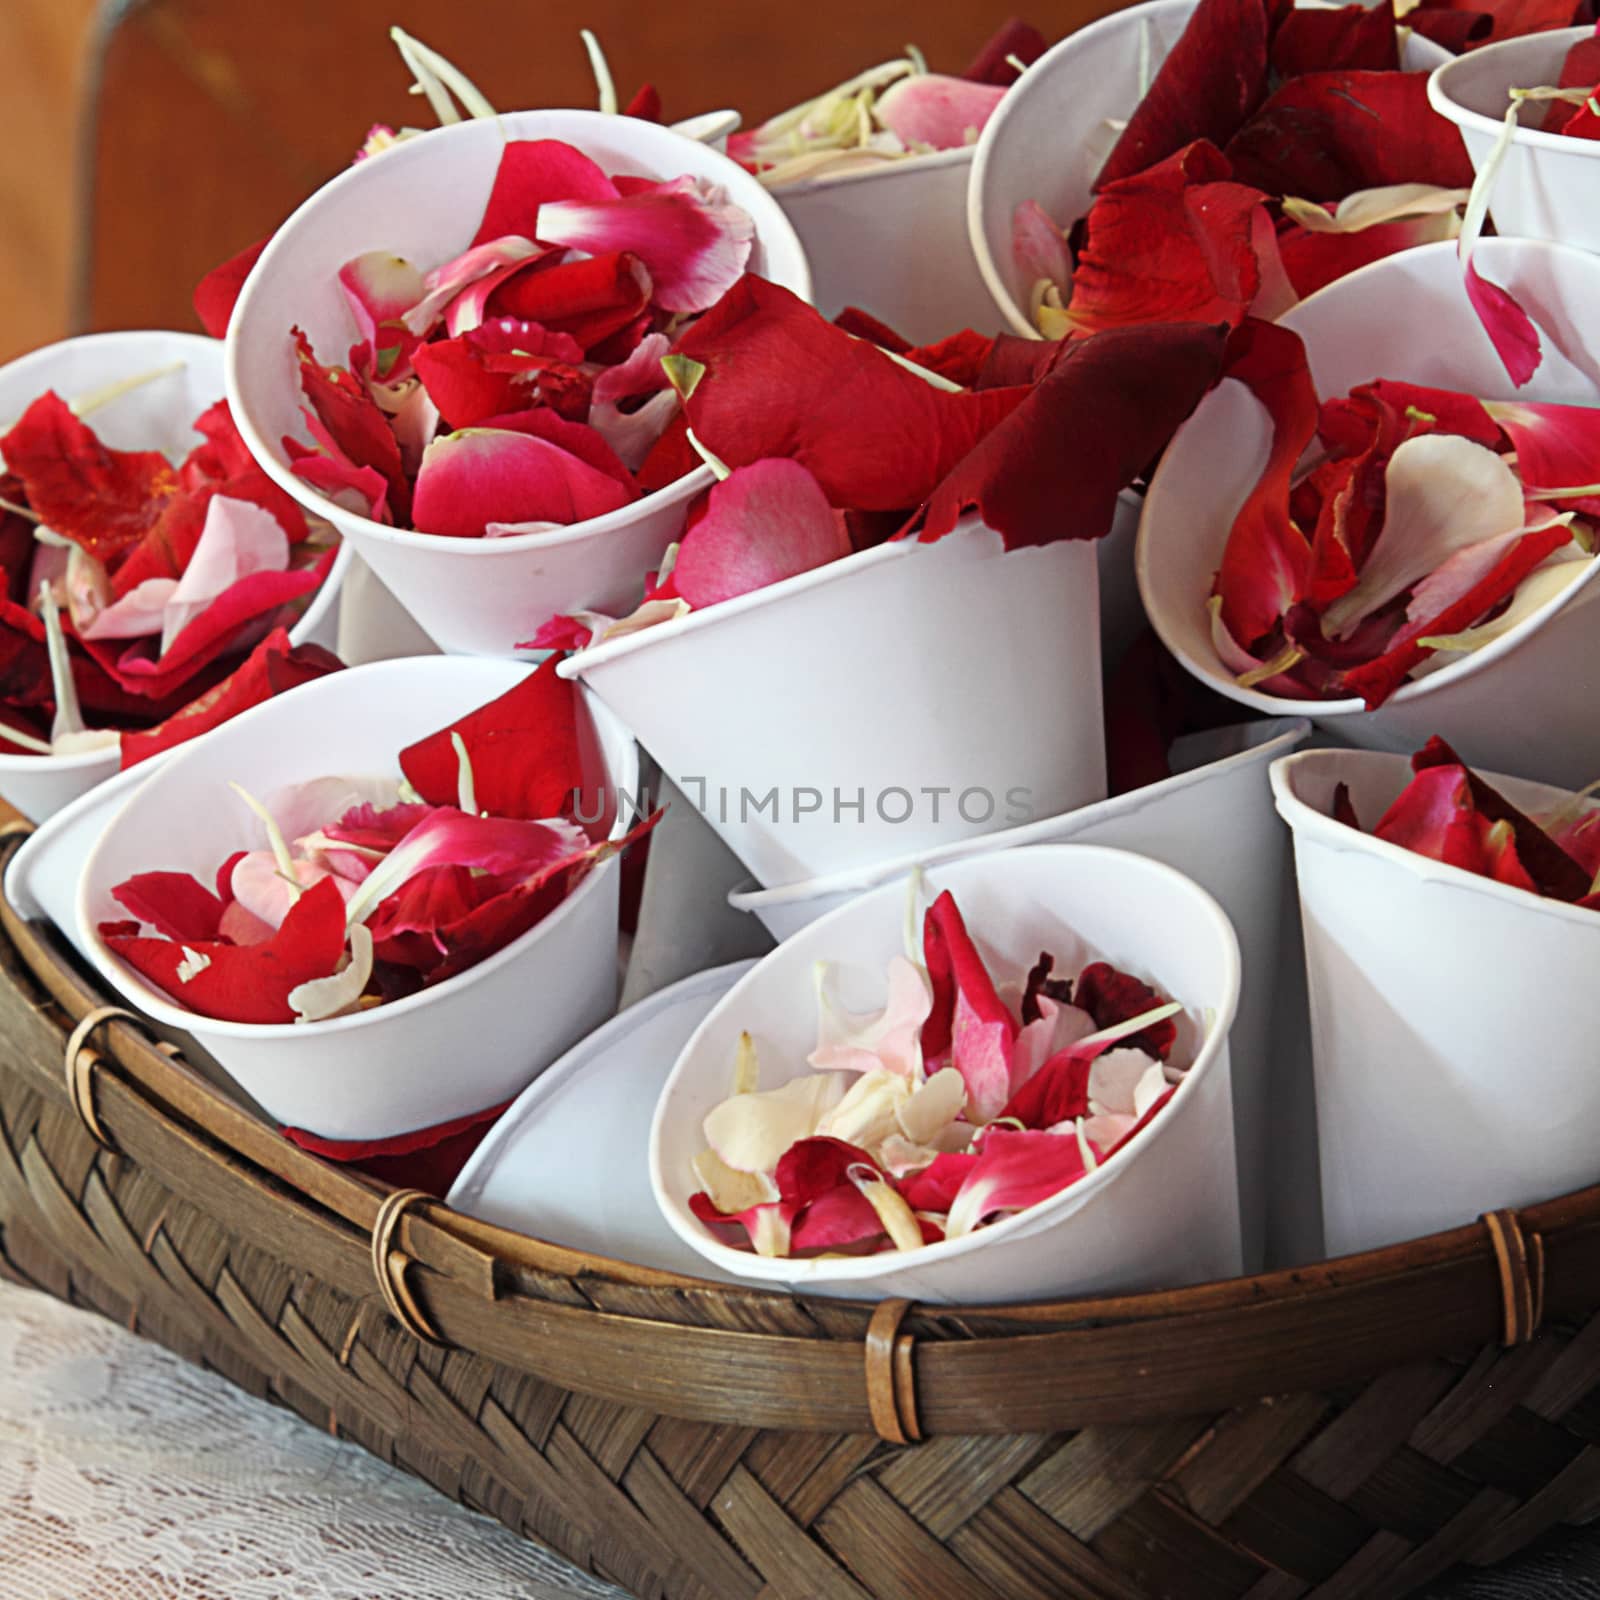 Rose petals in cup for scattering in wedding